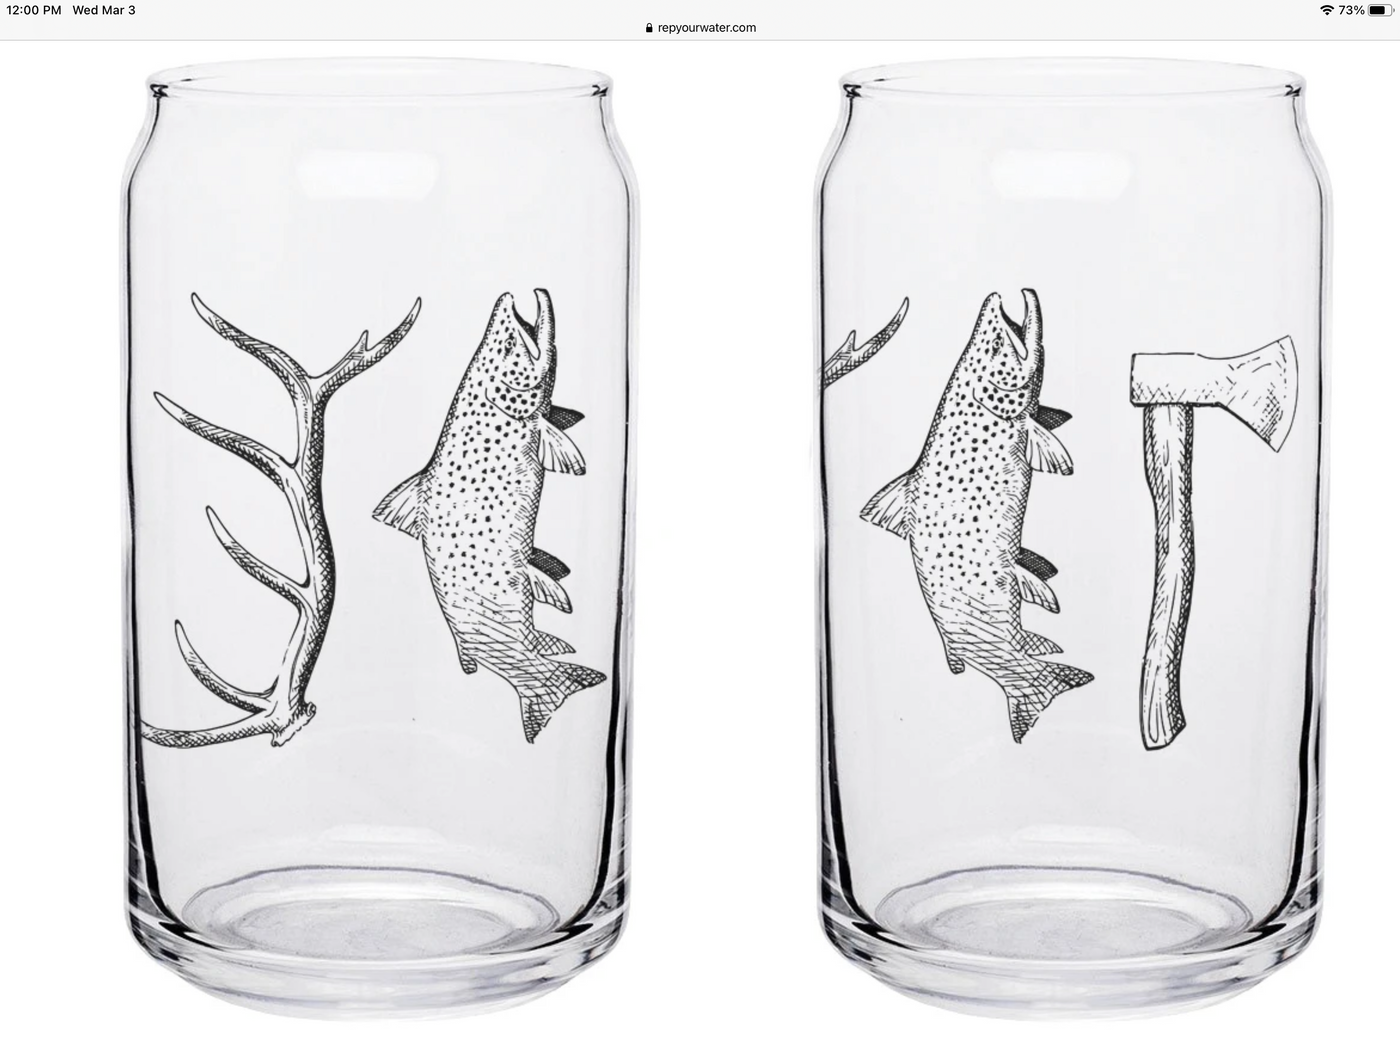 Rep Your Water Beer Can Glass